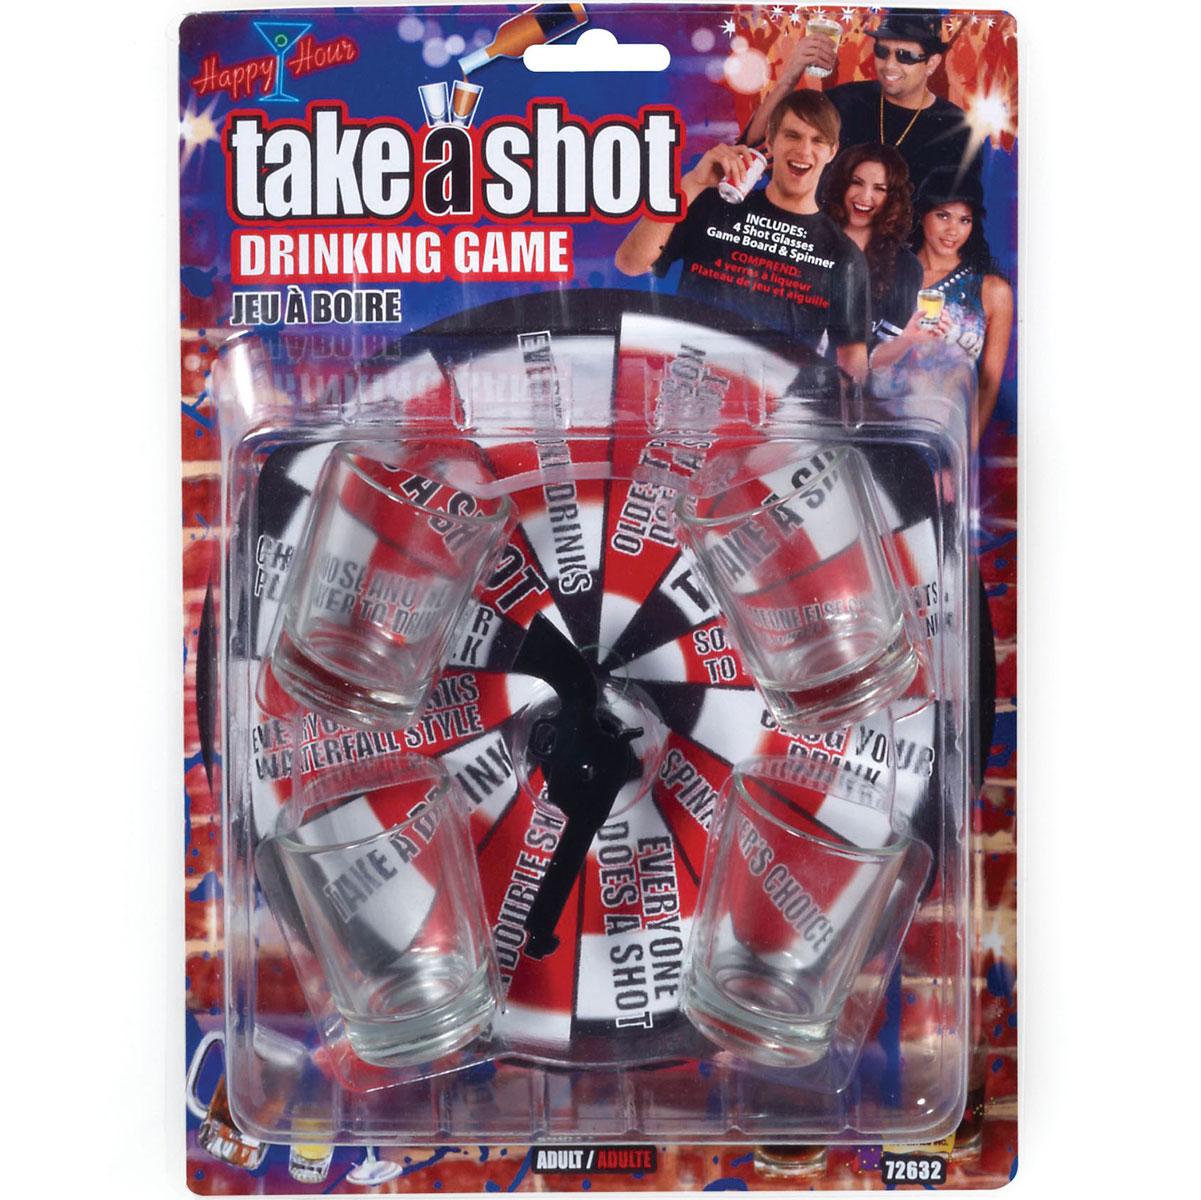 Take a Shot Drinking Game  by Forum Novelties 72632 and available in the UK here at Karnival Costumes online party shop